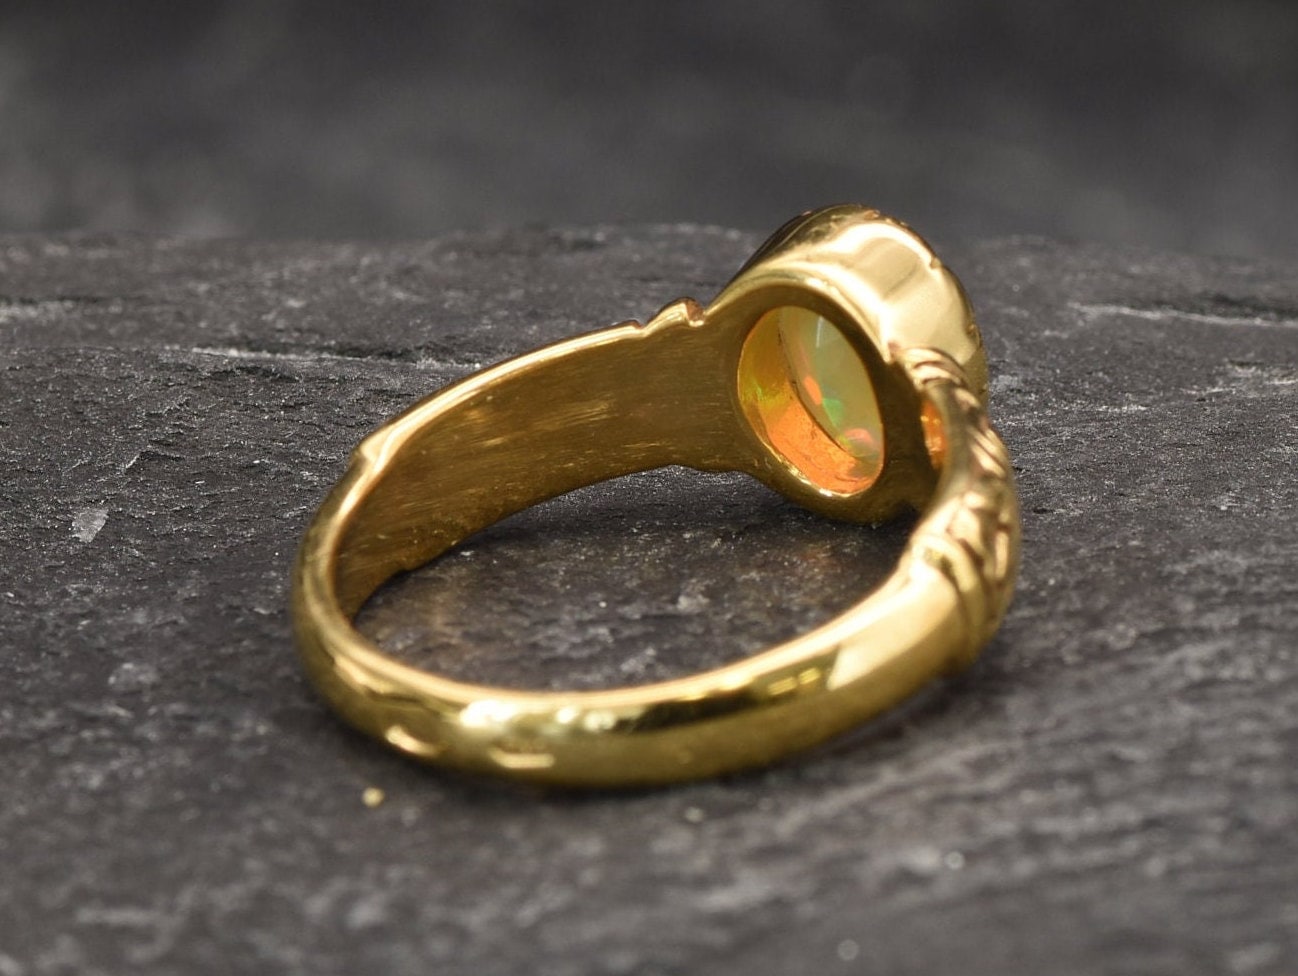 Fire Opal Ring, Natural Fire Opal, Gold Opal Ring, Boho Ring, October Birthstone, Tribal Ring, Bohemian Ring, Wide Band, Gold Vermeil Ring